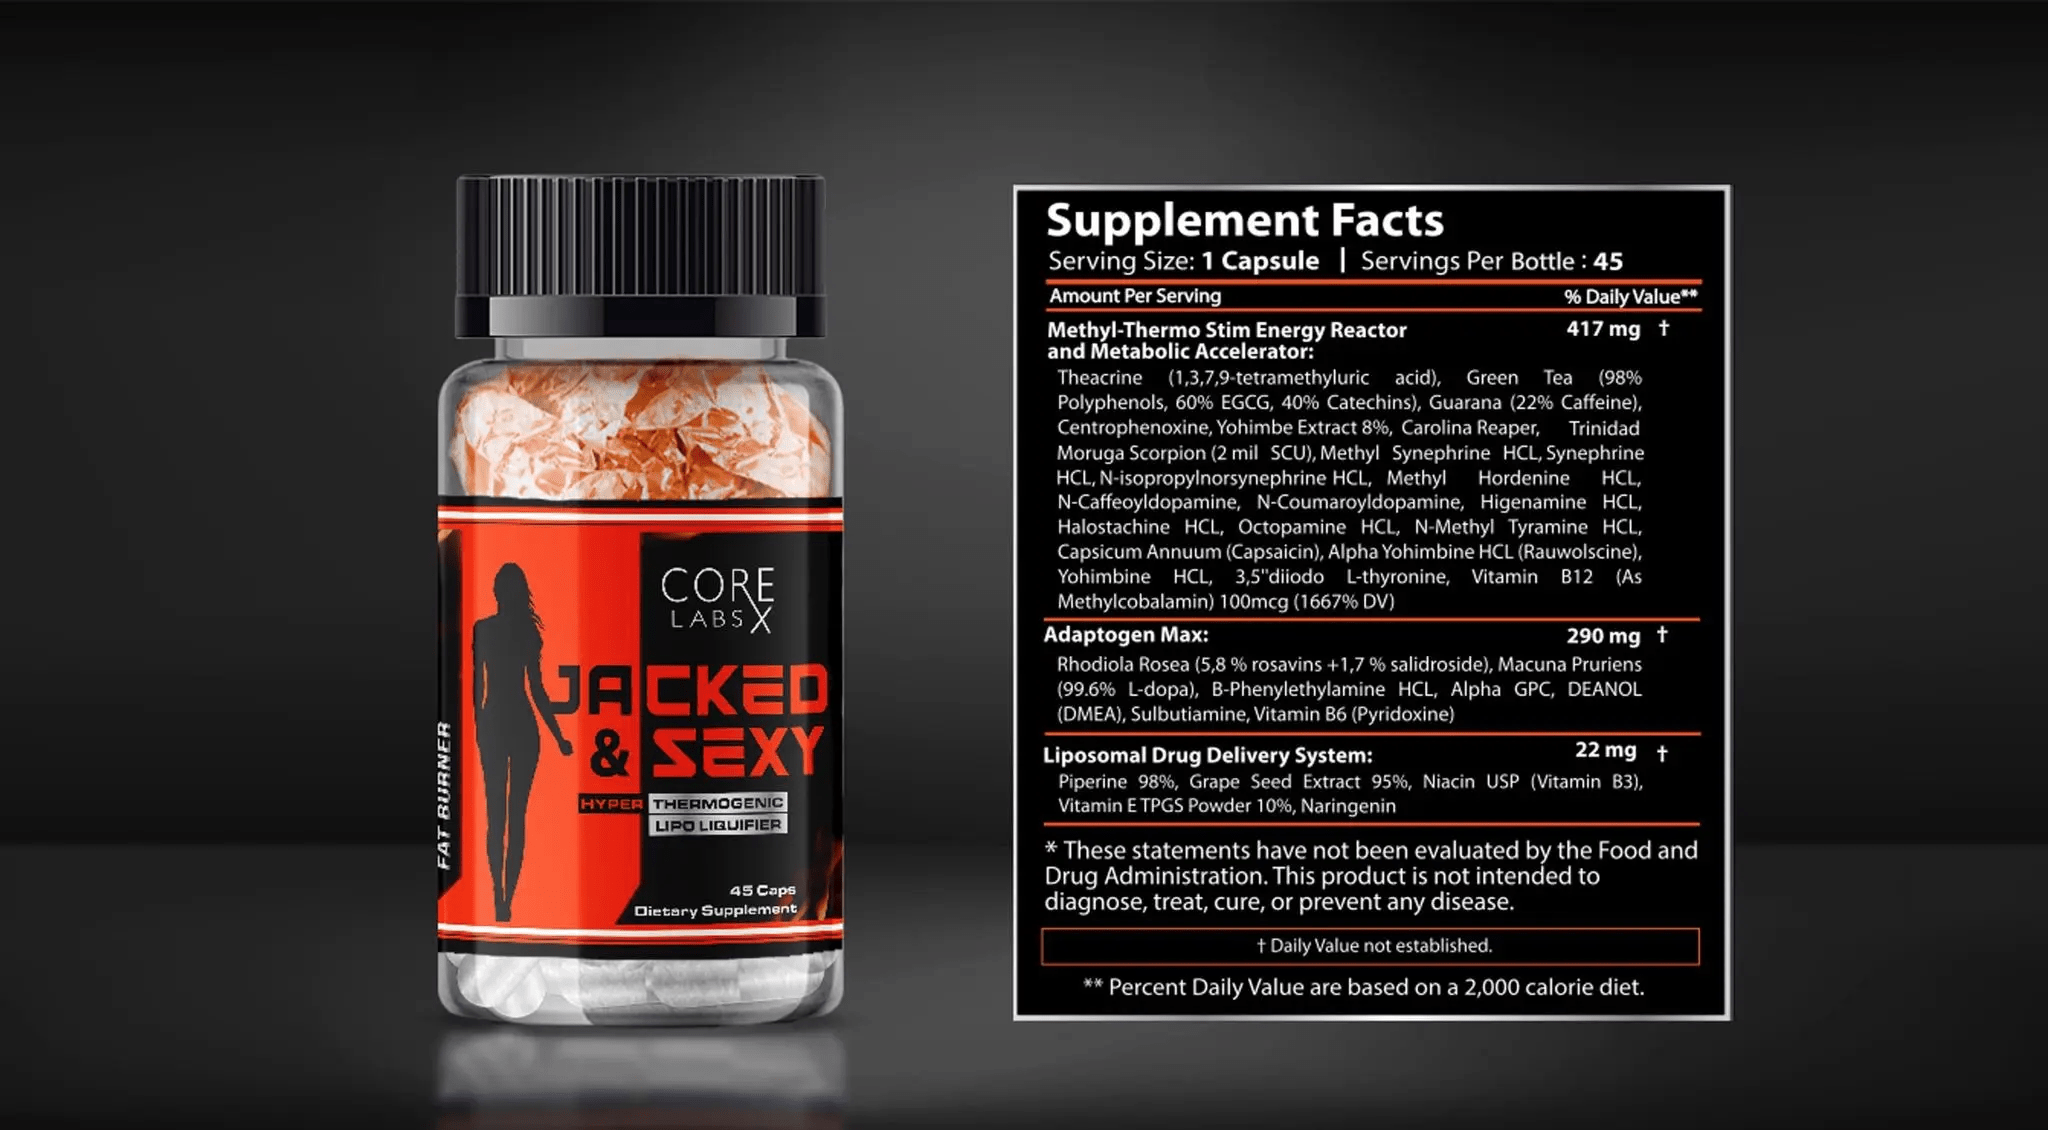 CORE LABS X Jacked & Sexy 45 шт. / 45 servings,  ml, Core Labs. Fat Burner